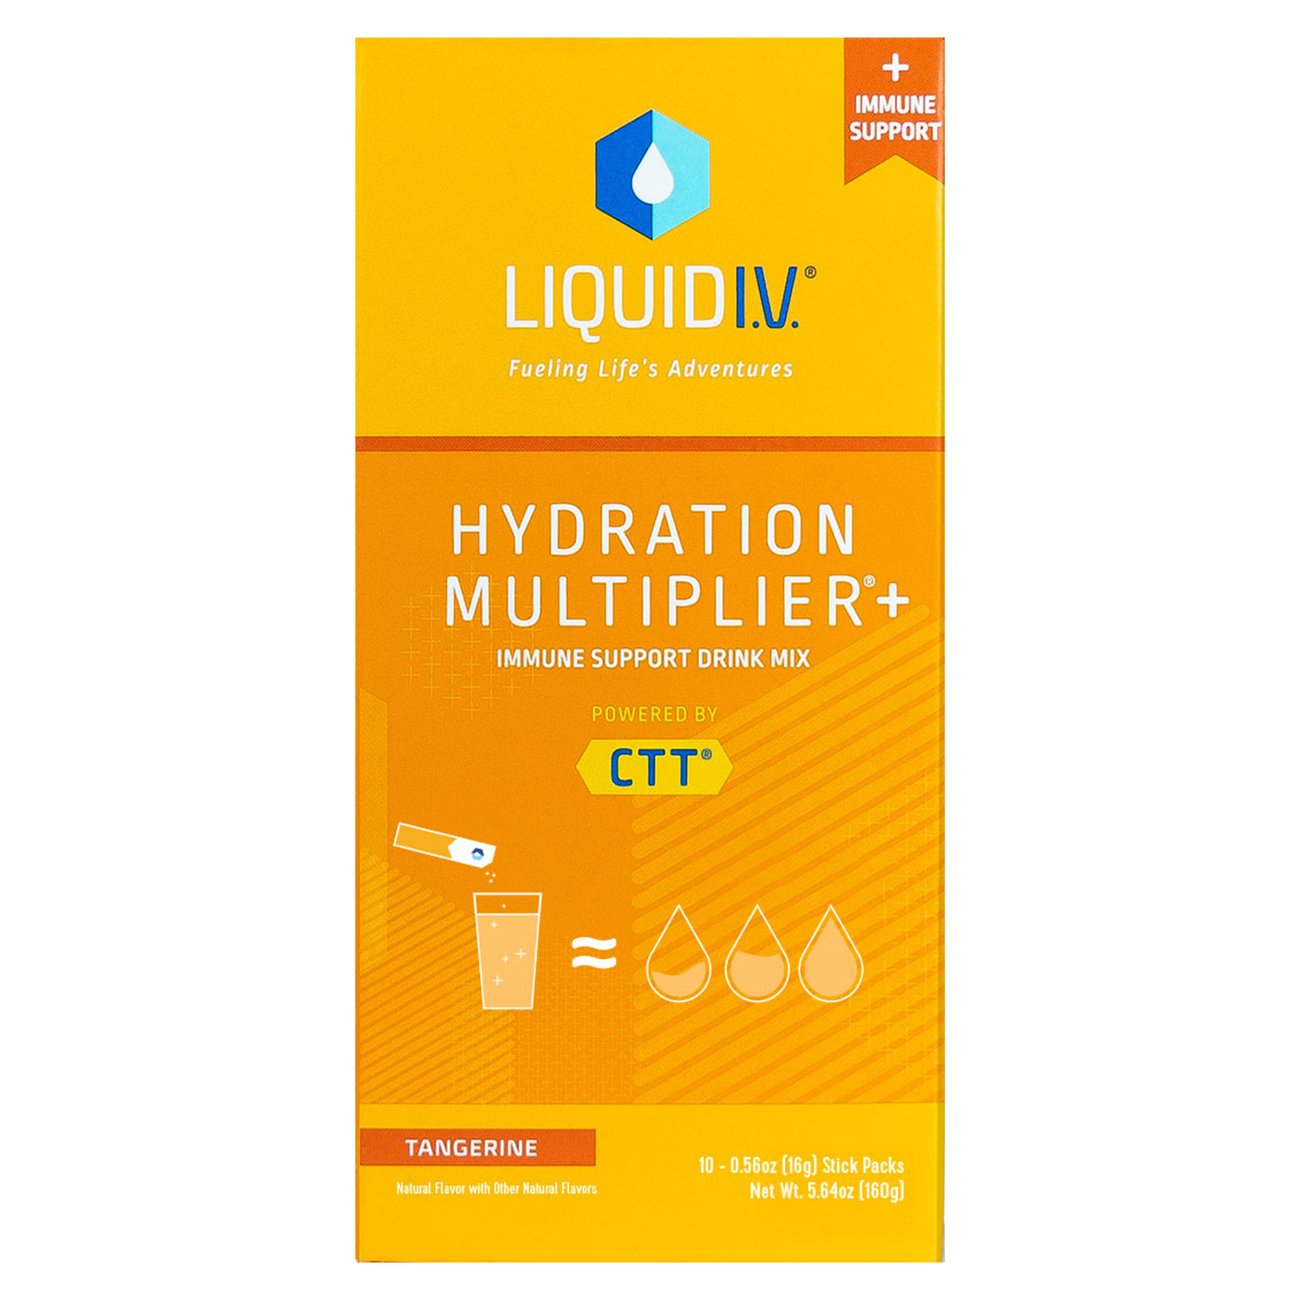 Non-alcoholic beverages that are better than water: Liquid I.V.